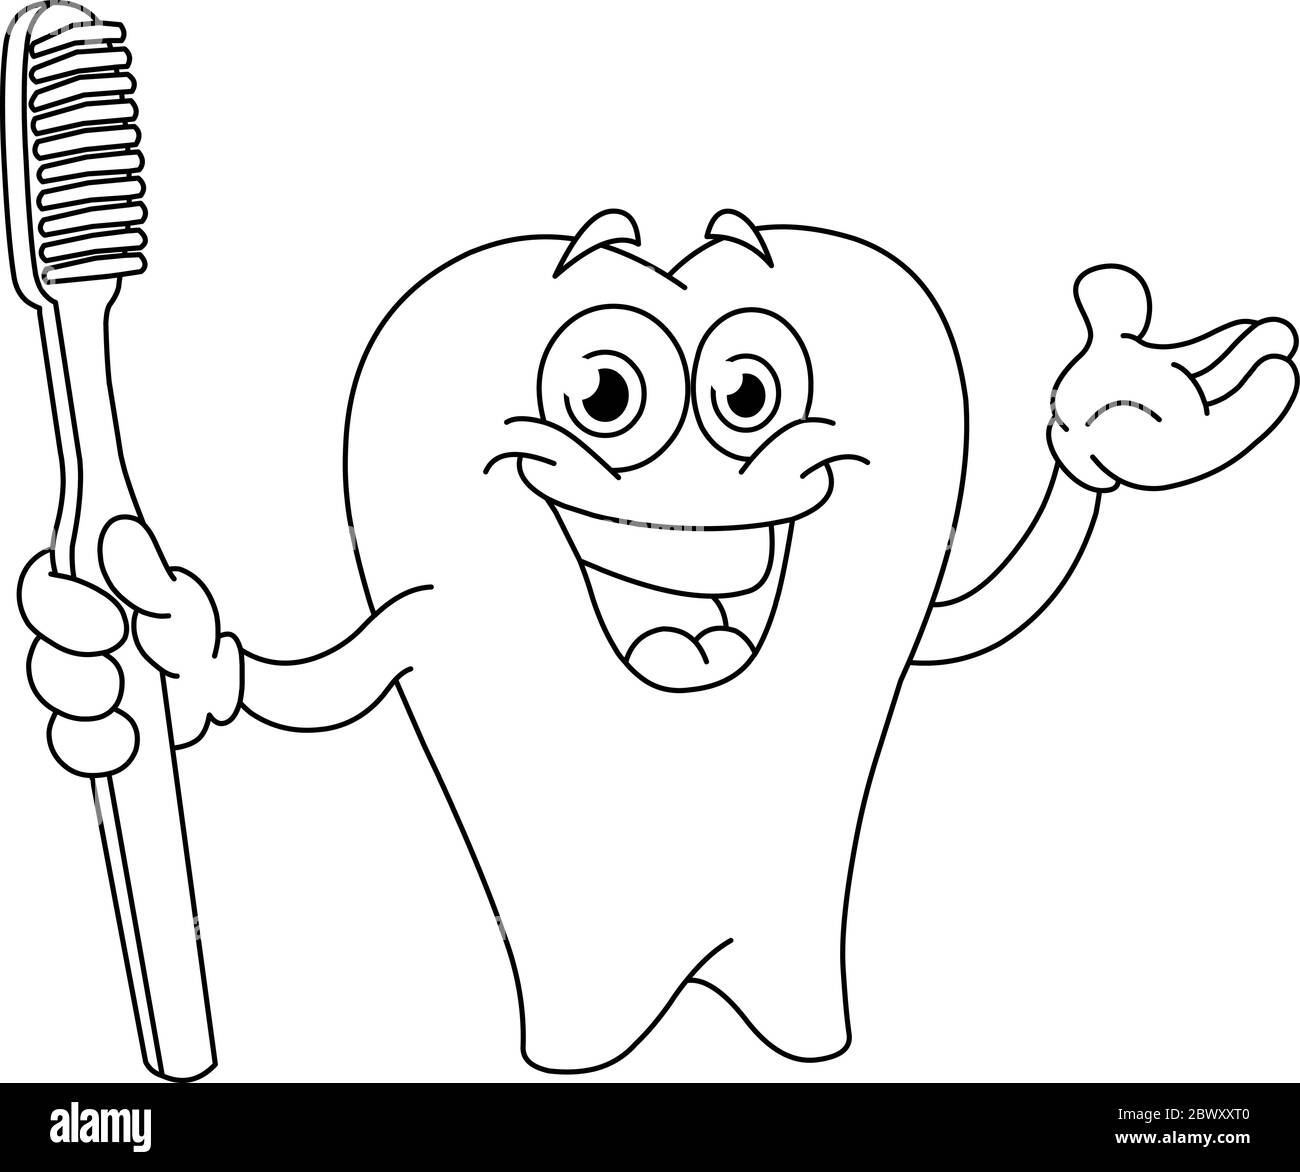 Outlined cartoon tooth holding a toothbrush. Vector illustration coloring page. Stock Vector